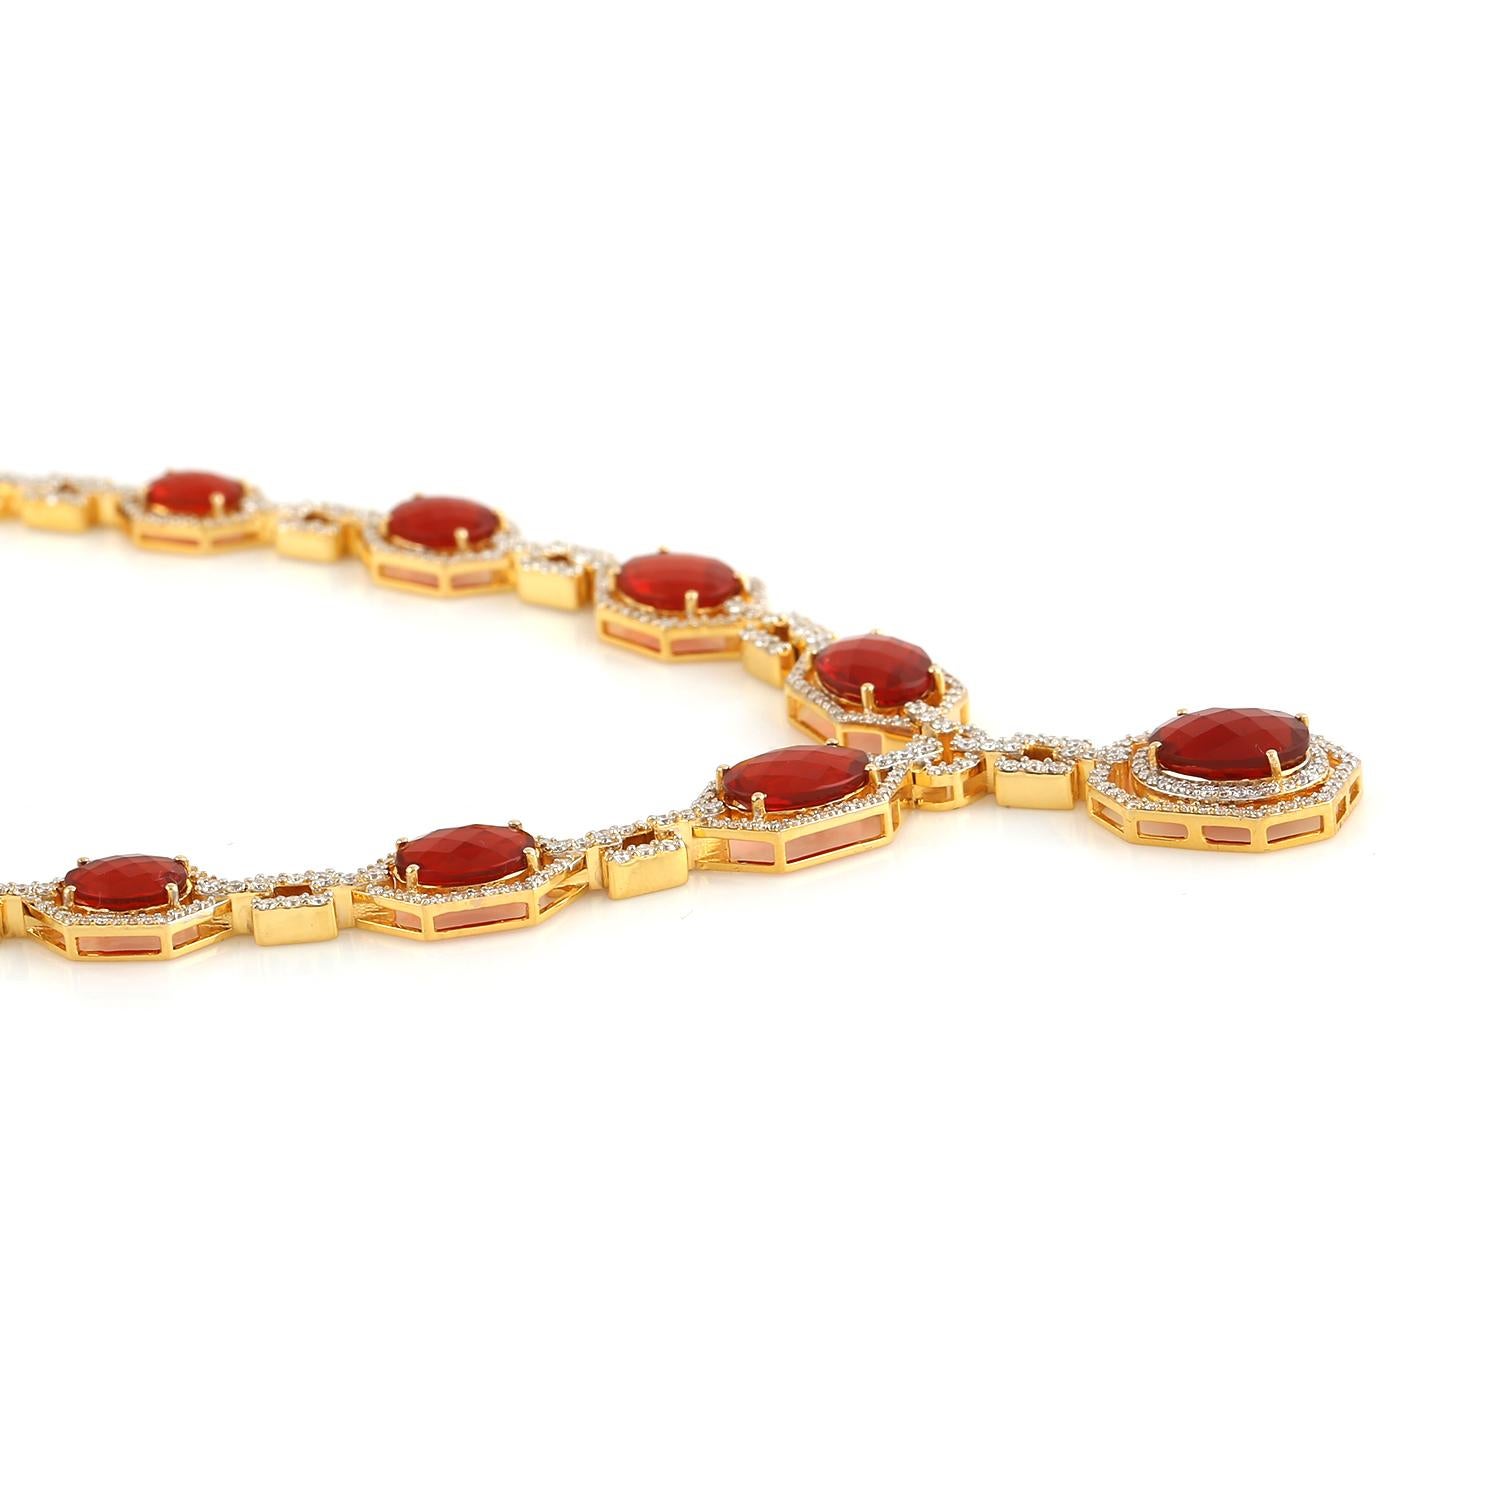 Oval Shaped Fire Opal Chain Necklace With Pave Diamonds In 18k Yellow Gold In New Condition For Sale In New York, NY